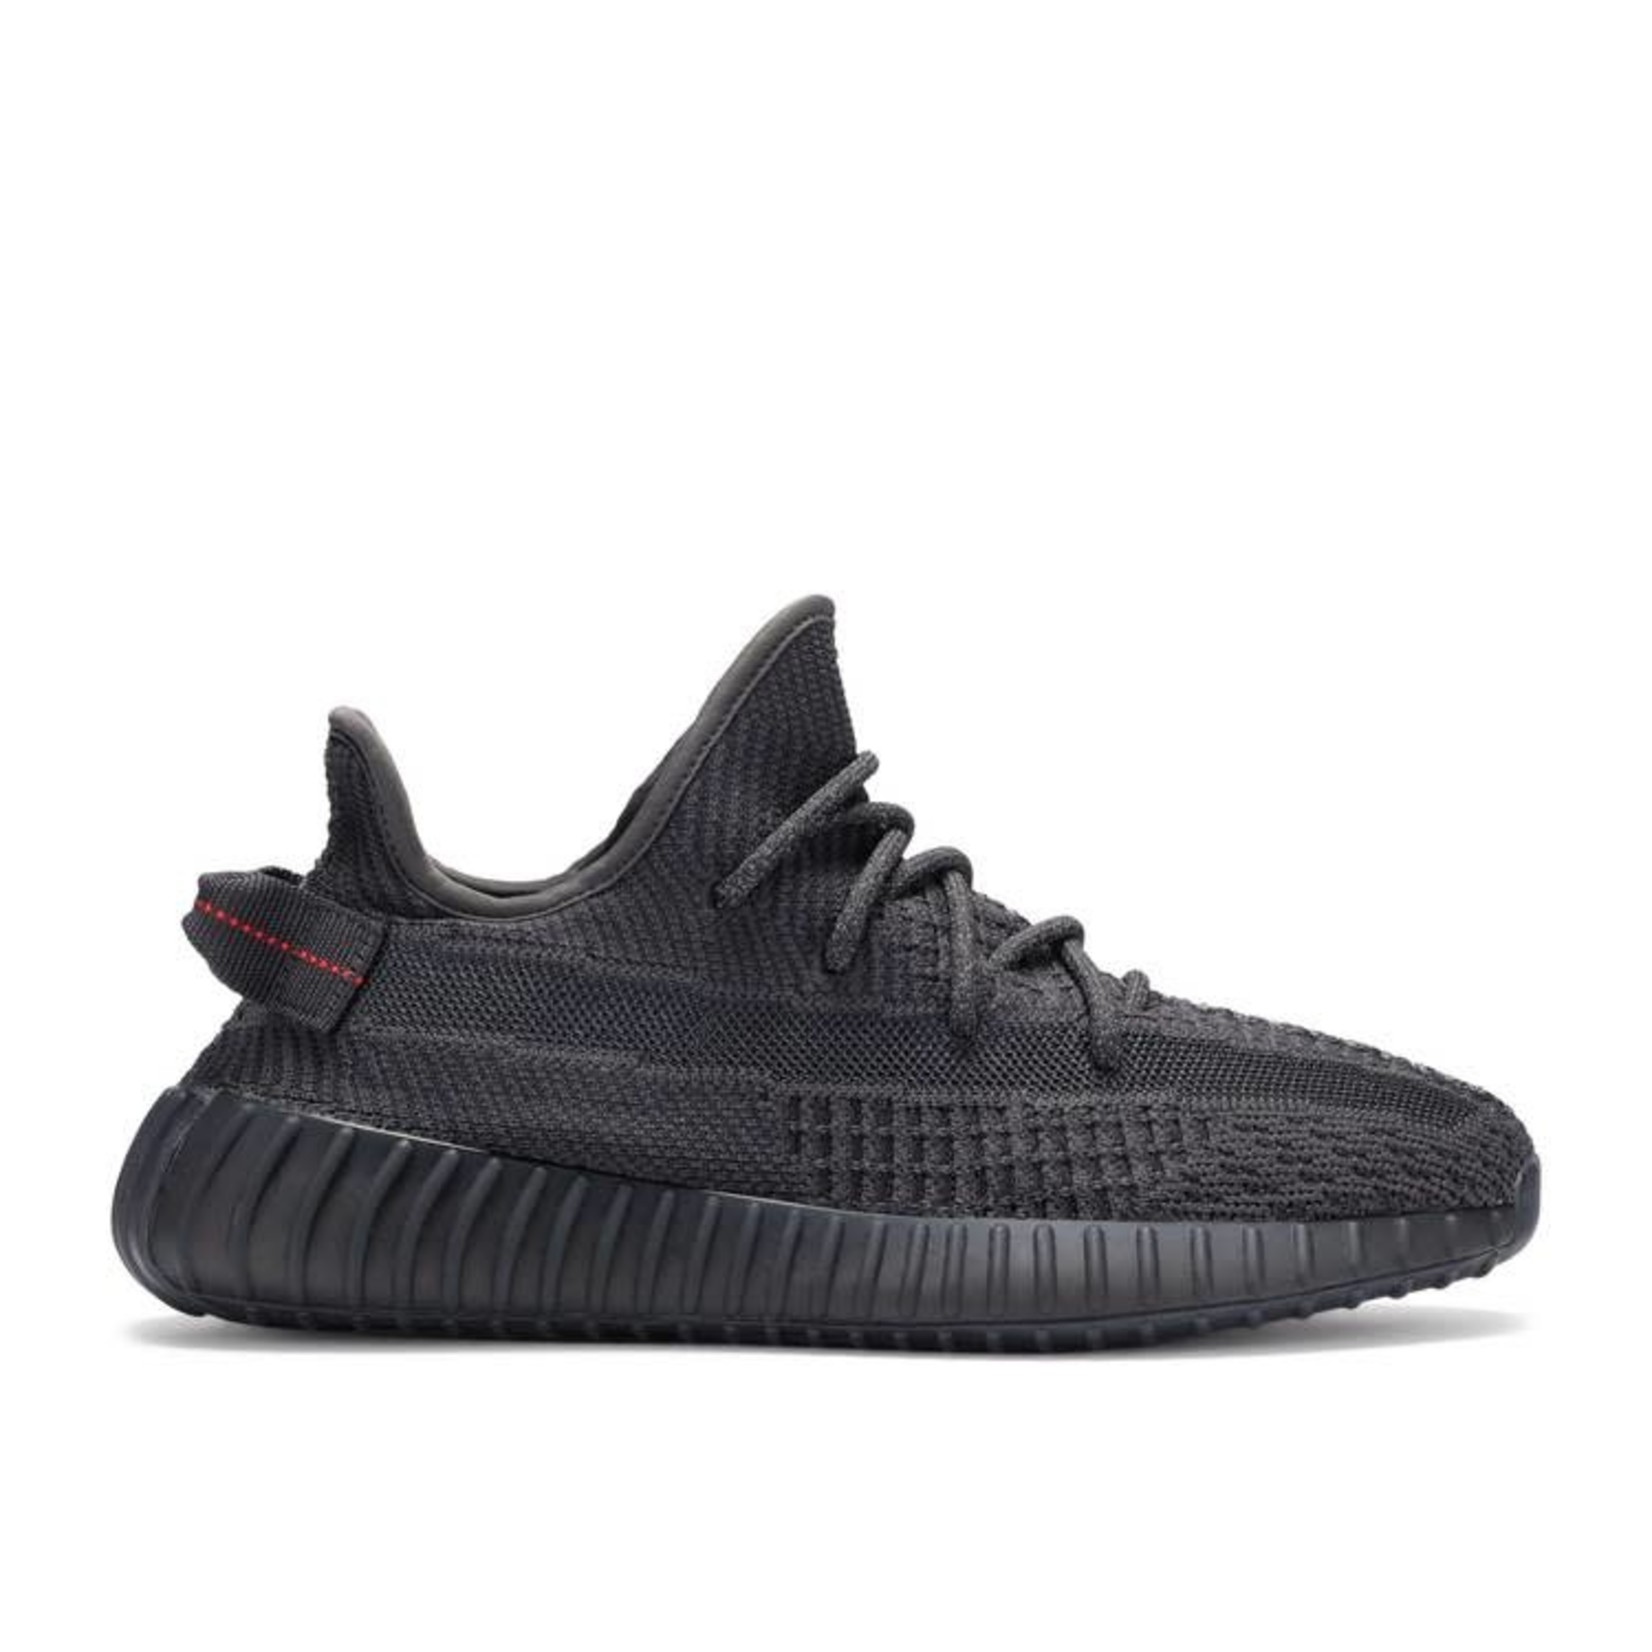 Adidas Adidas Yeezy Boost 350 V2 Black (Non-Reflective) Size 11, DS BRAND NEW